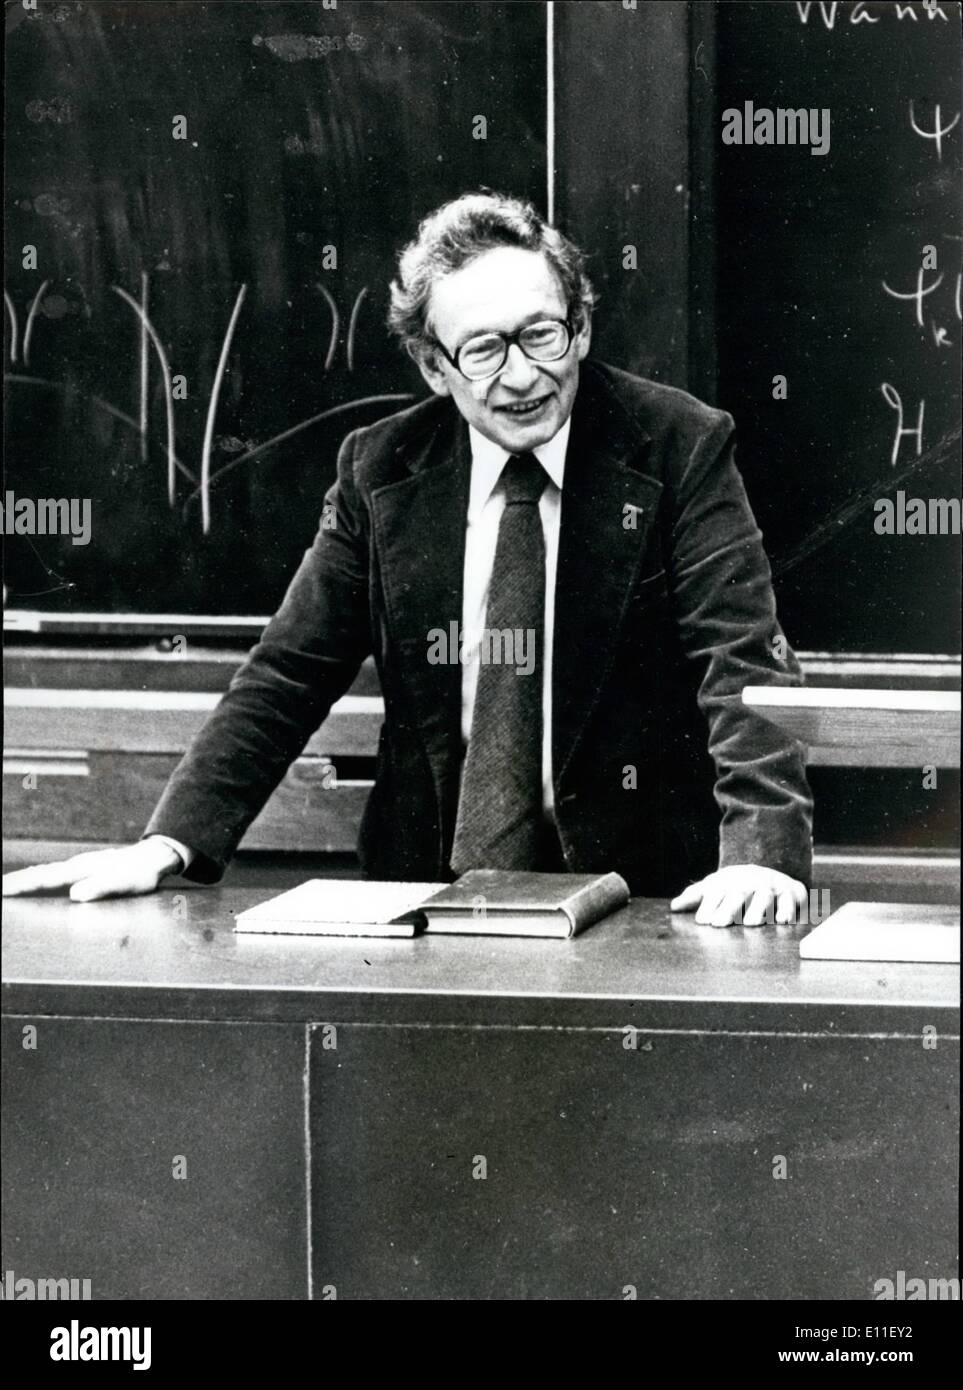 Oct. 10, 1977 - Prof Philip W. Anderson Nobel Prize In Physics: Prof Philip W. Anderson of Princeton University Department of Physics, U.S.A. has won the Nobel Prize in Physics Stock Photo